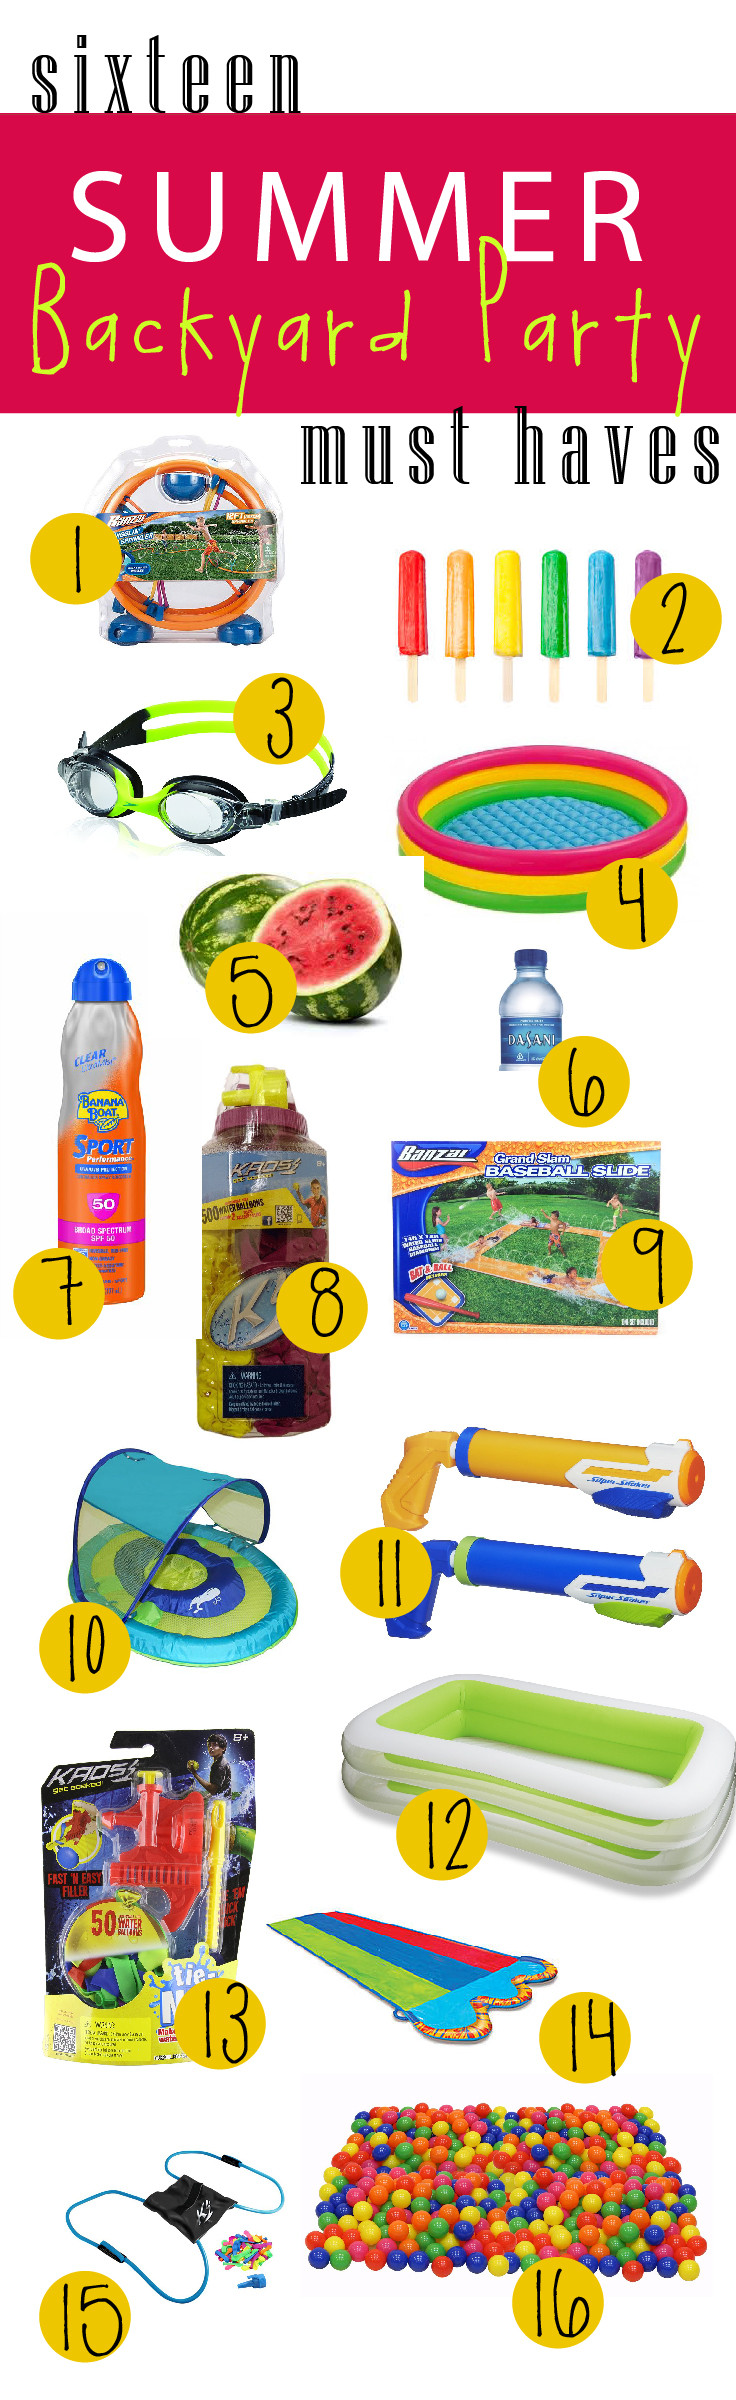 Backyard Water Party Ideas
 16 Summer Backyard Water Party Must Haves